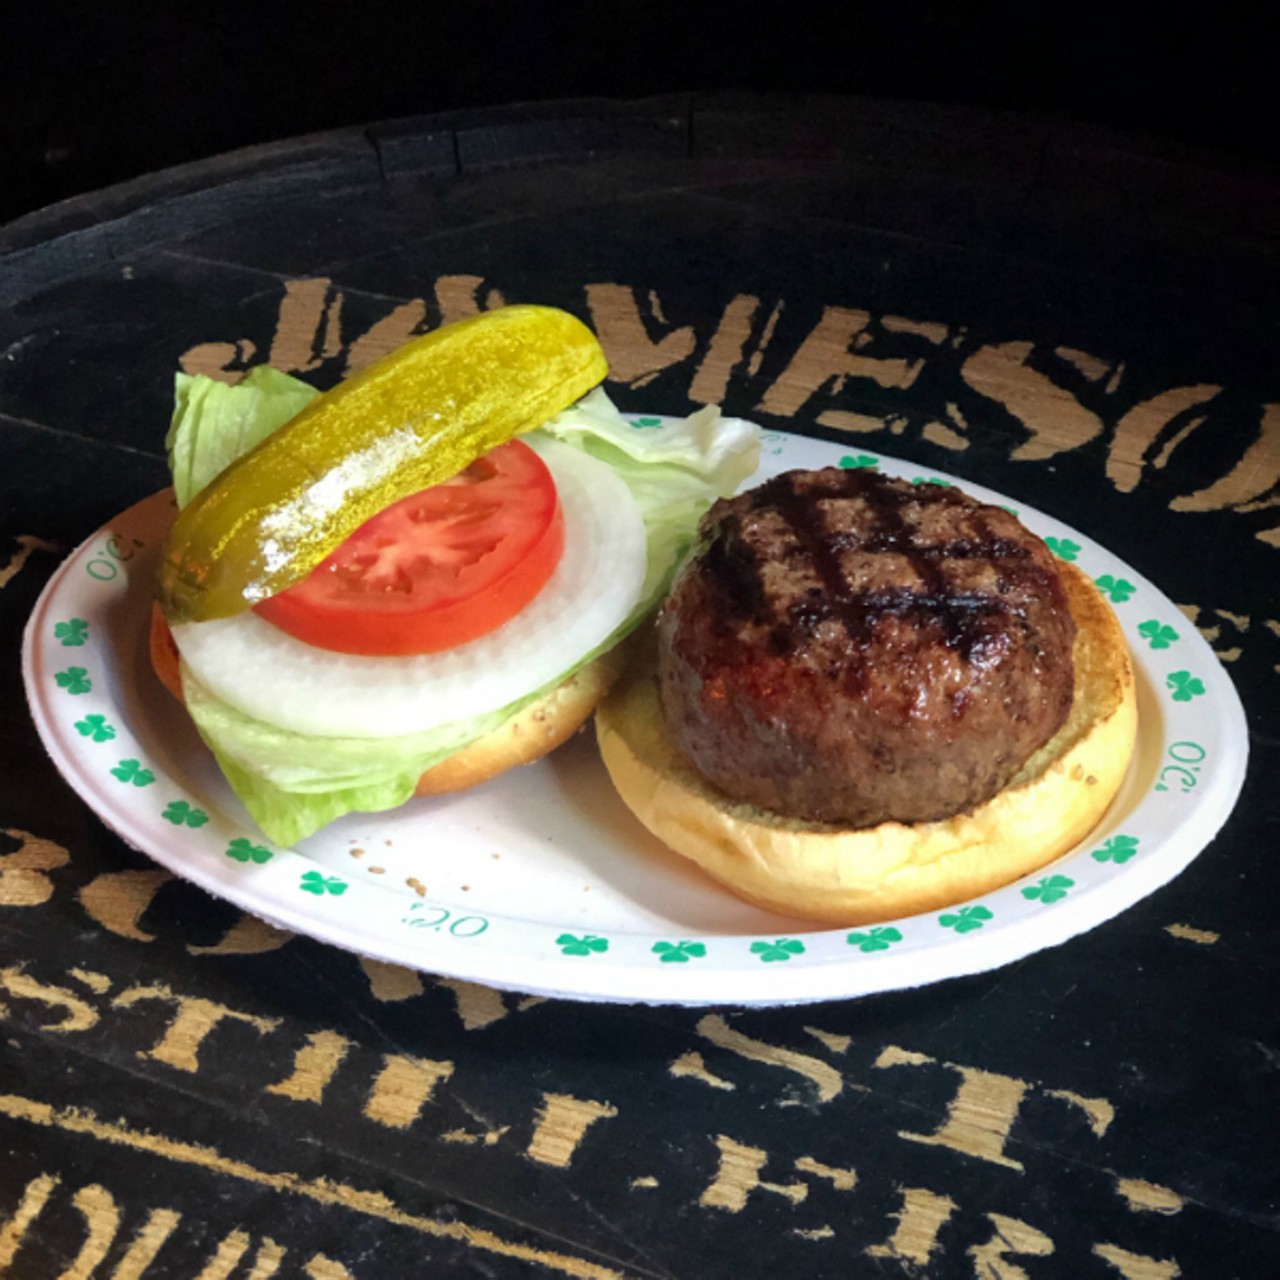 O'Connell's Pub
(4652 Shaw Avenue; 314-773-6600)
Fresh chopped sirloin mixed in house daily, charbroiled to perfection, comes with your choice of lettuce, tomato, pickle, onions and served on a Fazio Bun.